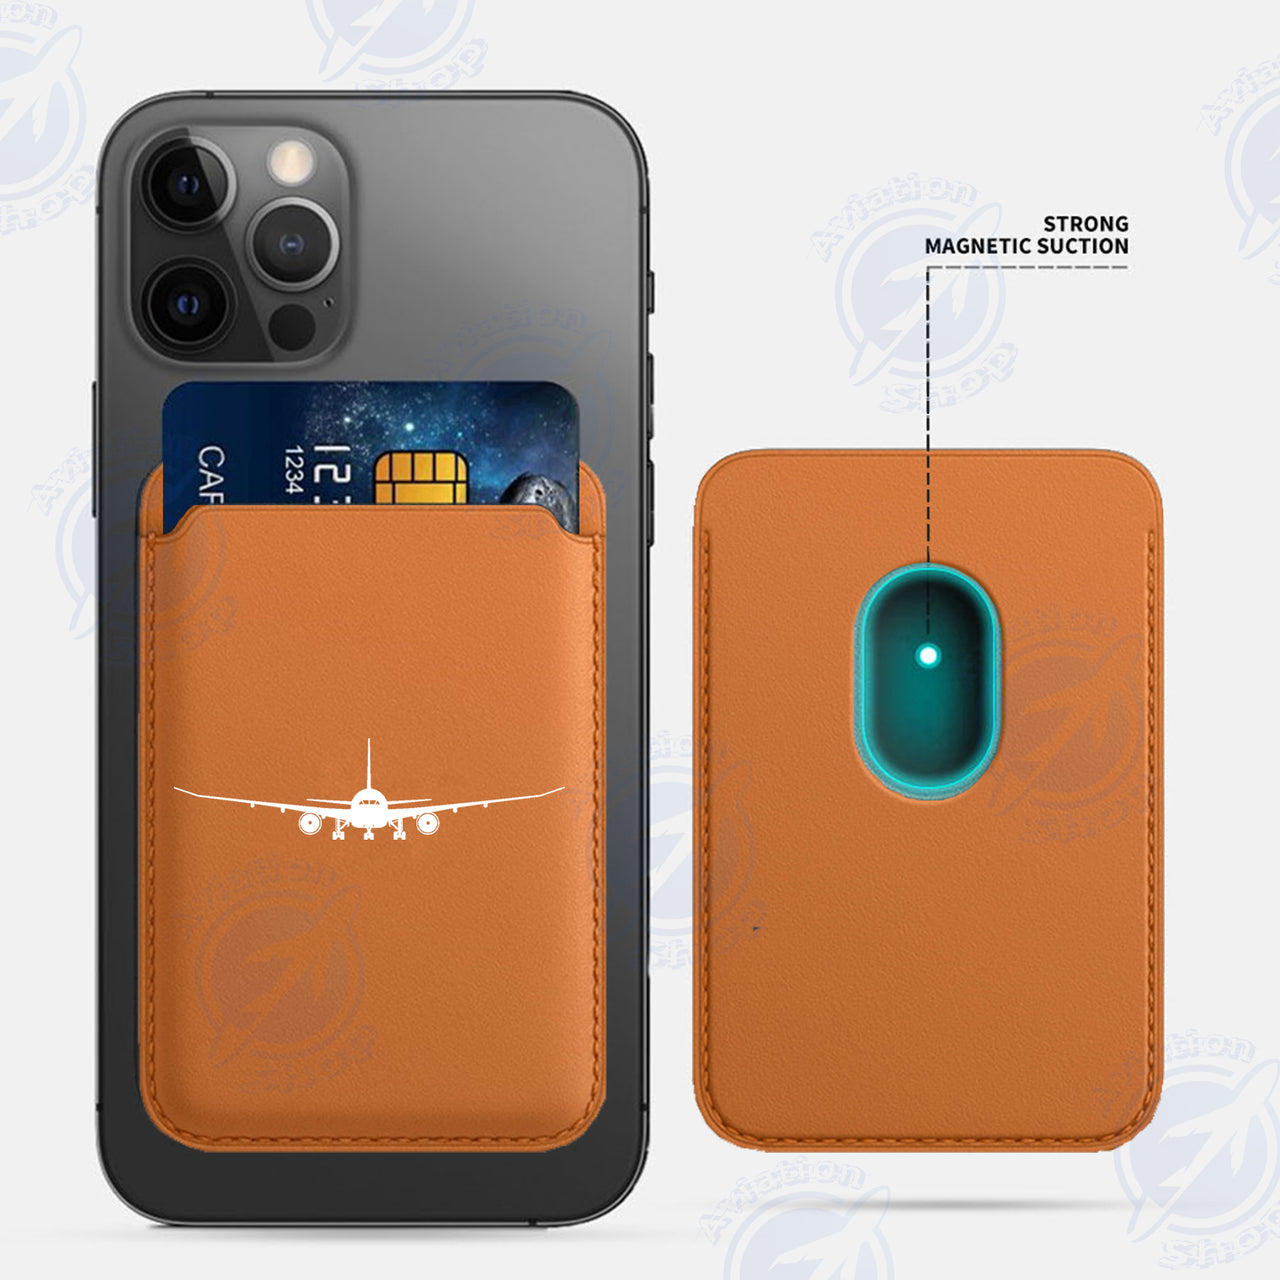 Boeing 787 Silhouette iPhone Cases Magnetic Card Wallet